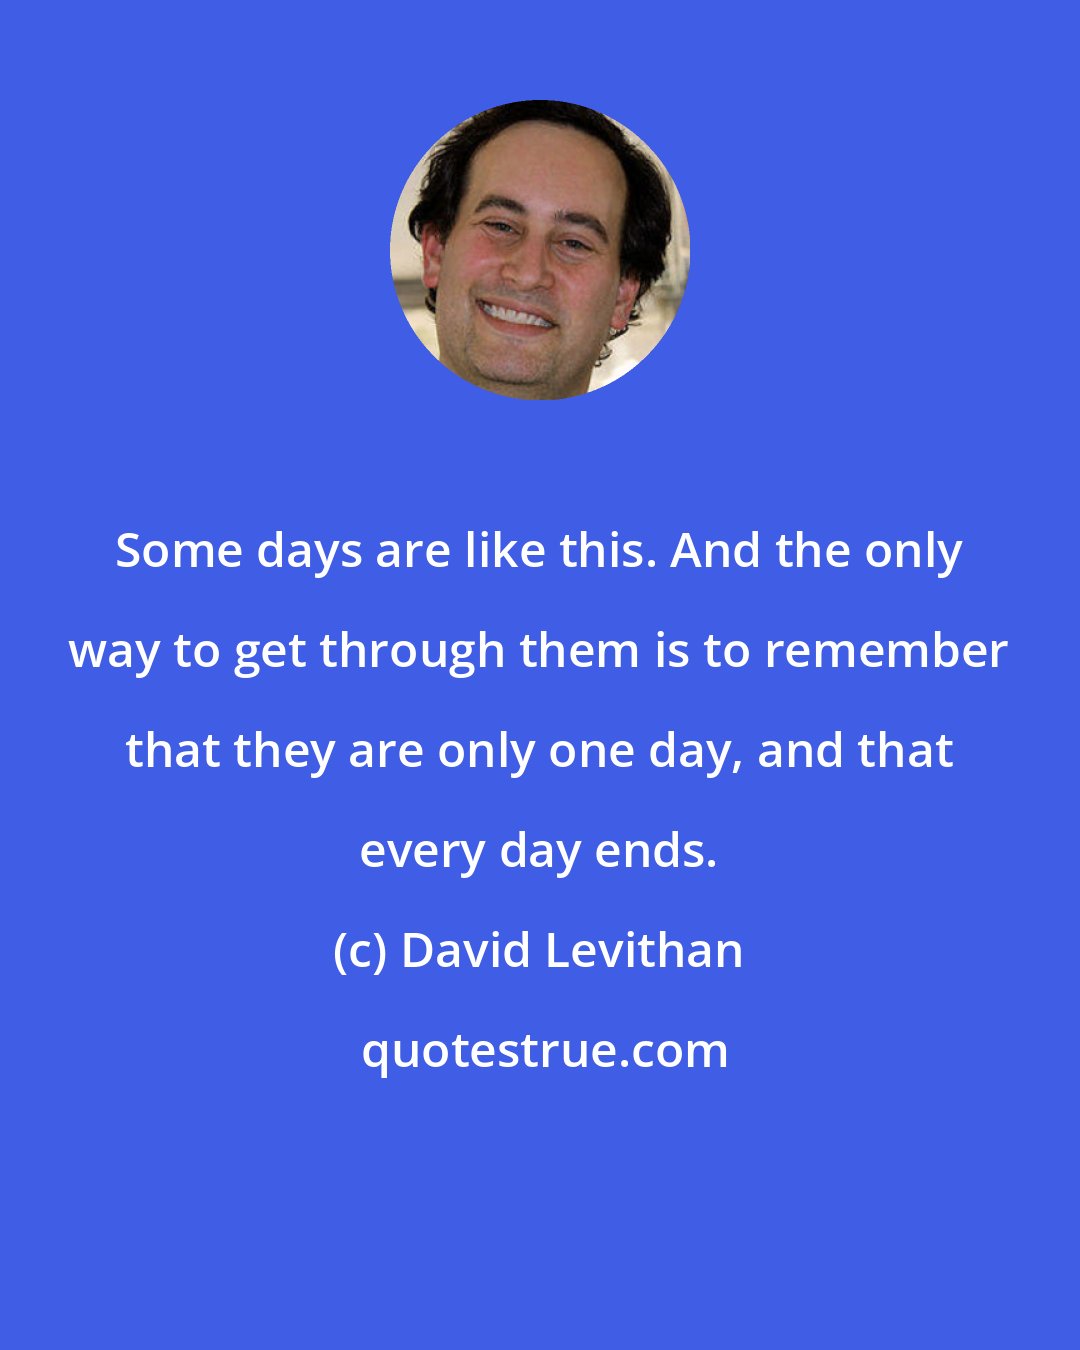 David Levithan: Some days are like this. And the only way to get through them is to remember that they are only one day, and that every day ends.